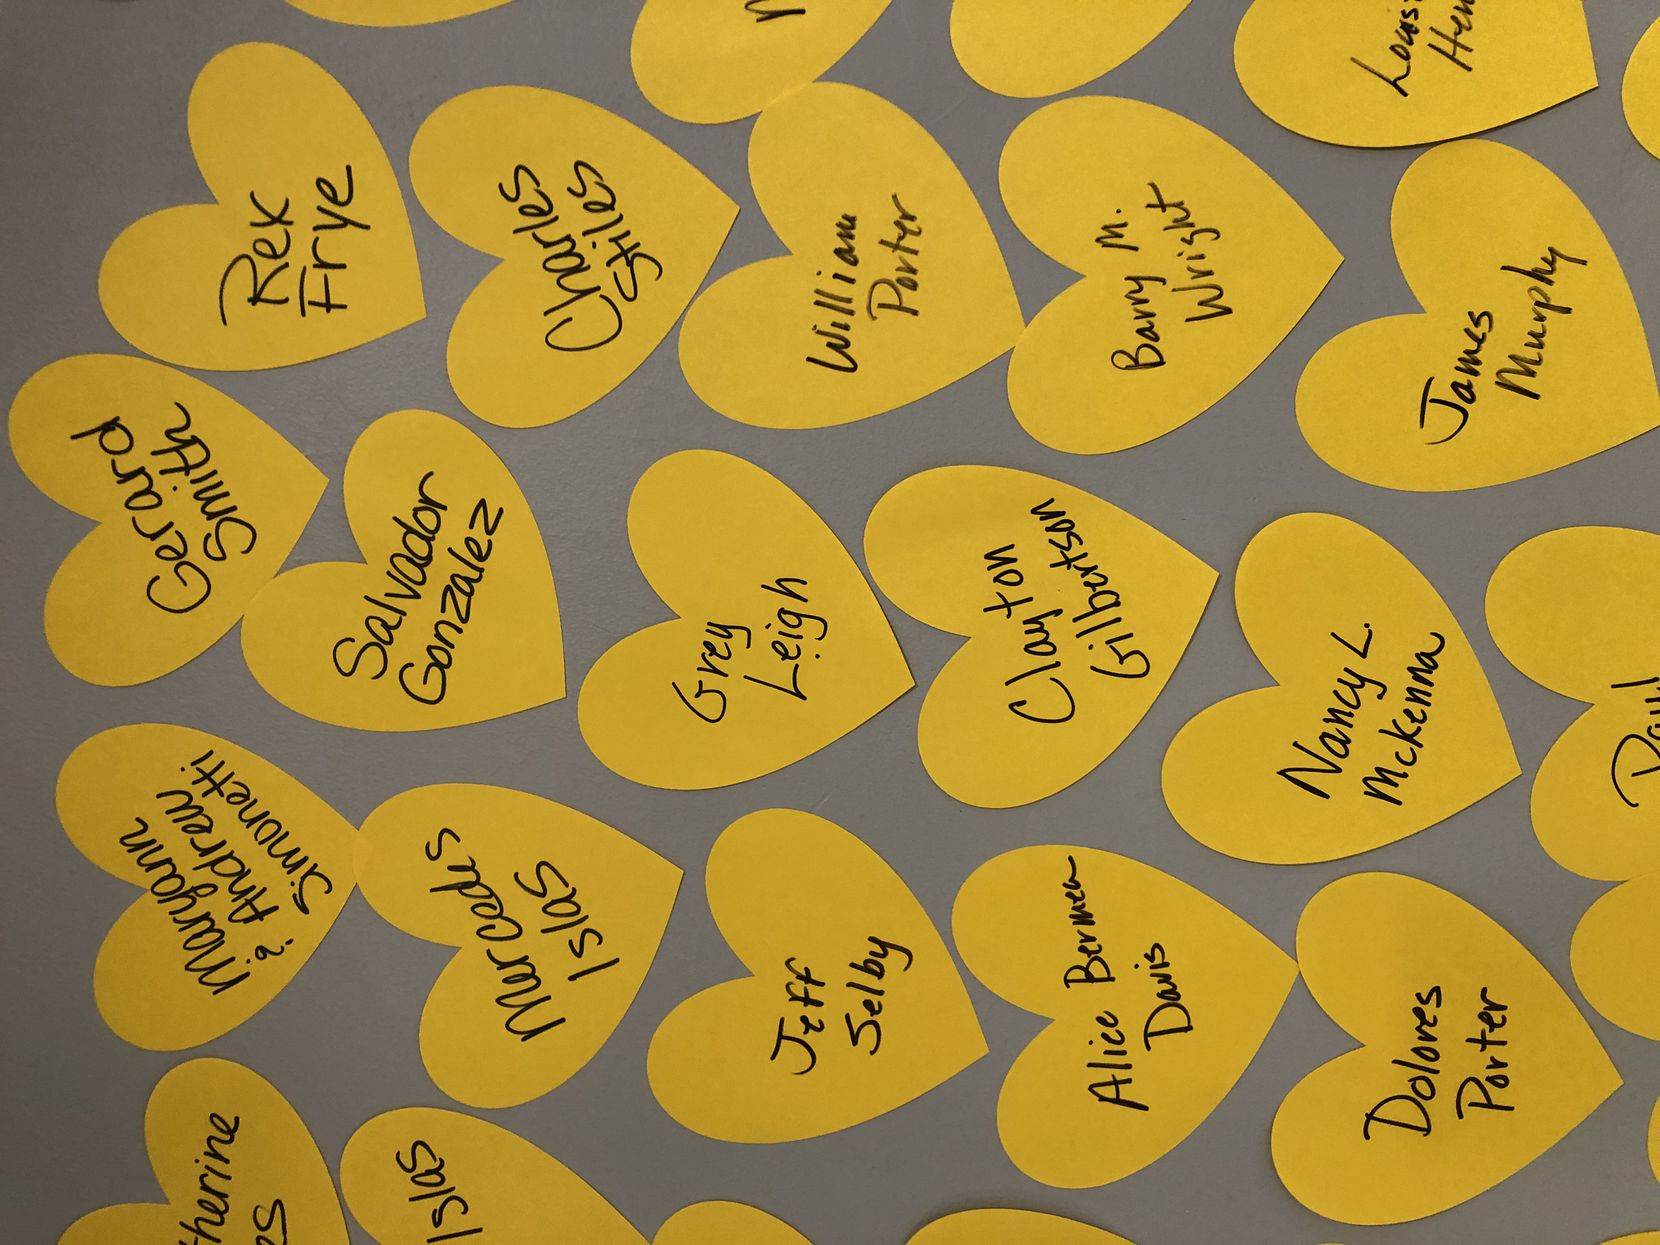 People are sending yellow hearts to recognize loved ones who have died from COVID-19.